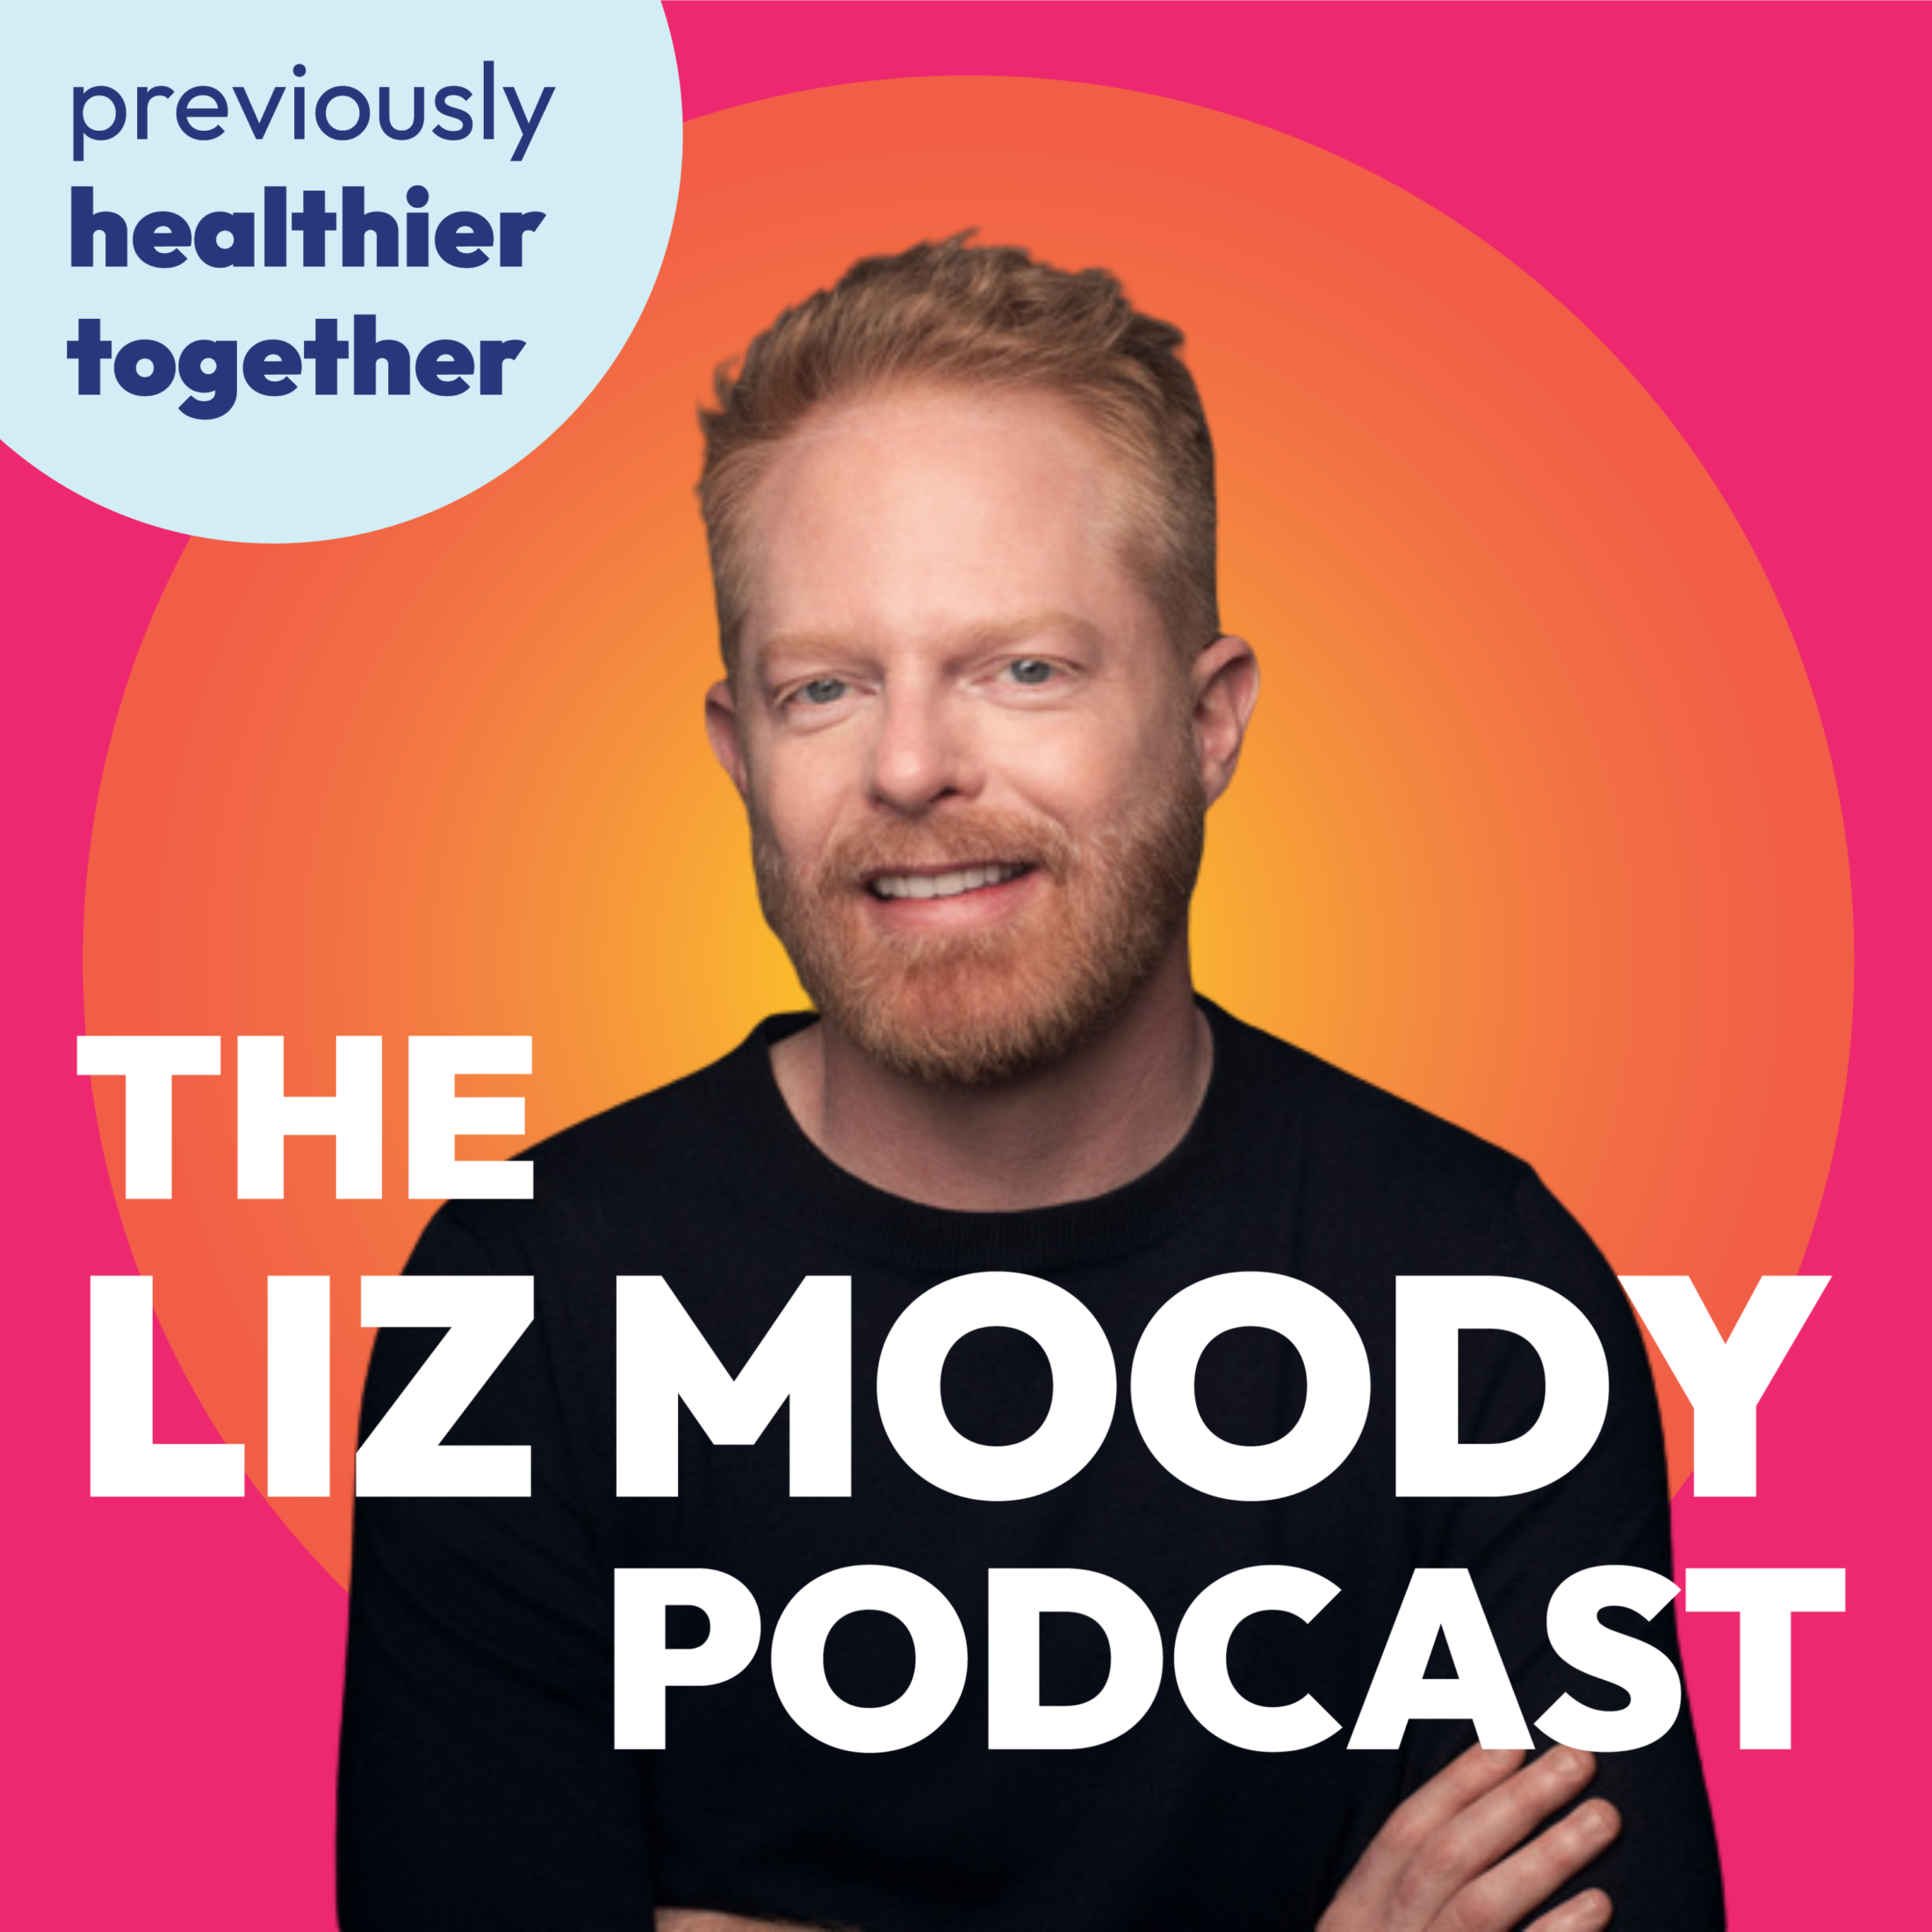 Jesse Tyler Ferguson On Finding Confidence, Remaining Resilient, Building Strong Relationships, & More